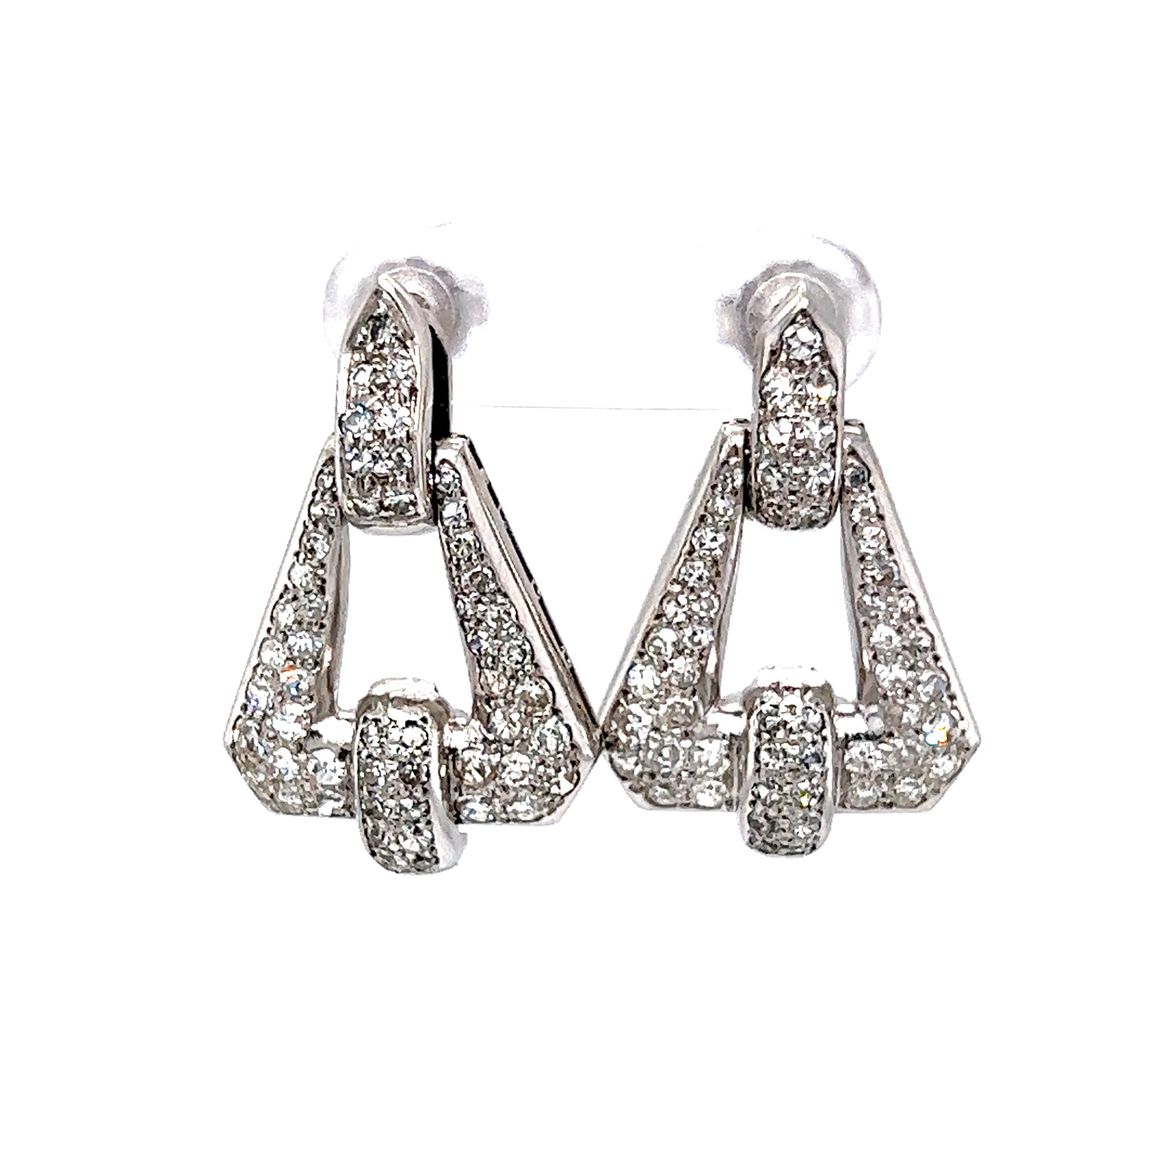 Art Deco Pave Diamond Drop Earrings in PlatinumComposition: Platinum Total Diamond Weight: 1.59ct Total Gram Weight: 11.6 g